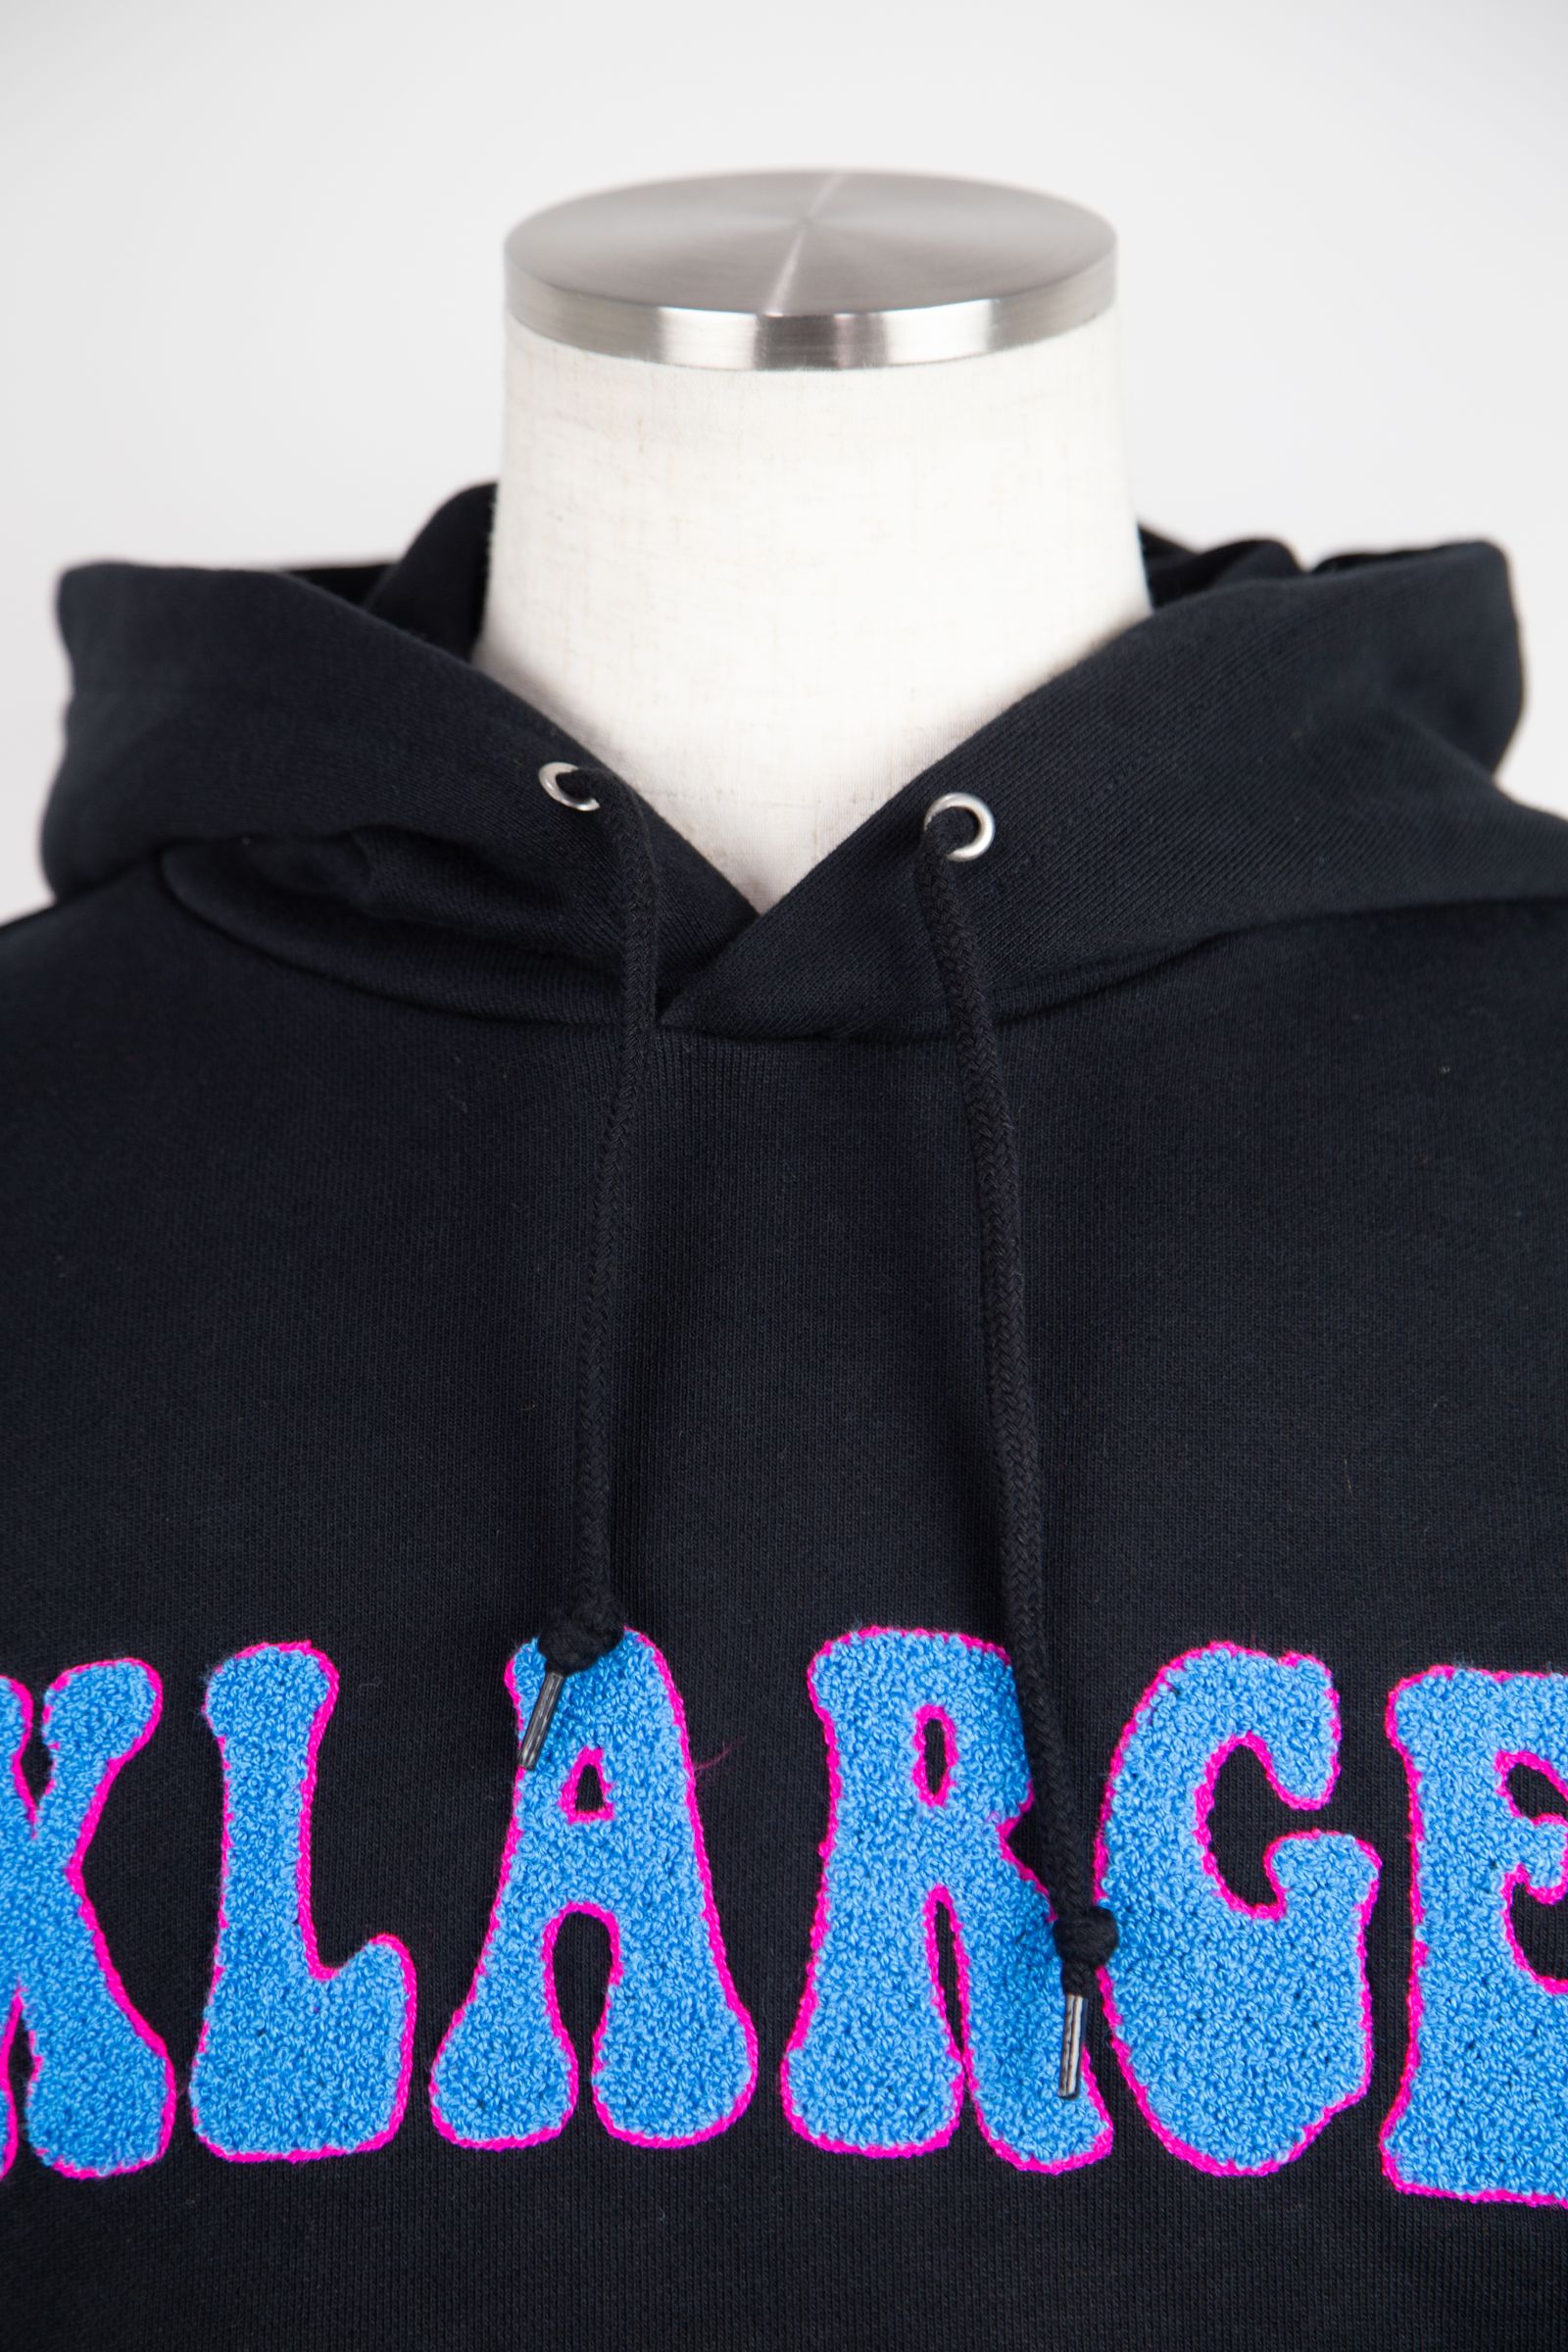 XLARGE - [人気リピート商品] FLOWER PULLOVER HOODED SWEAT